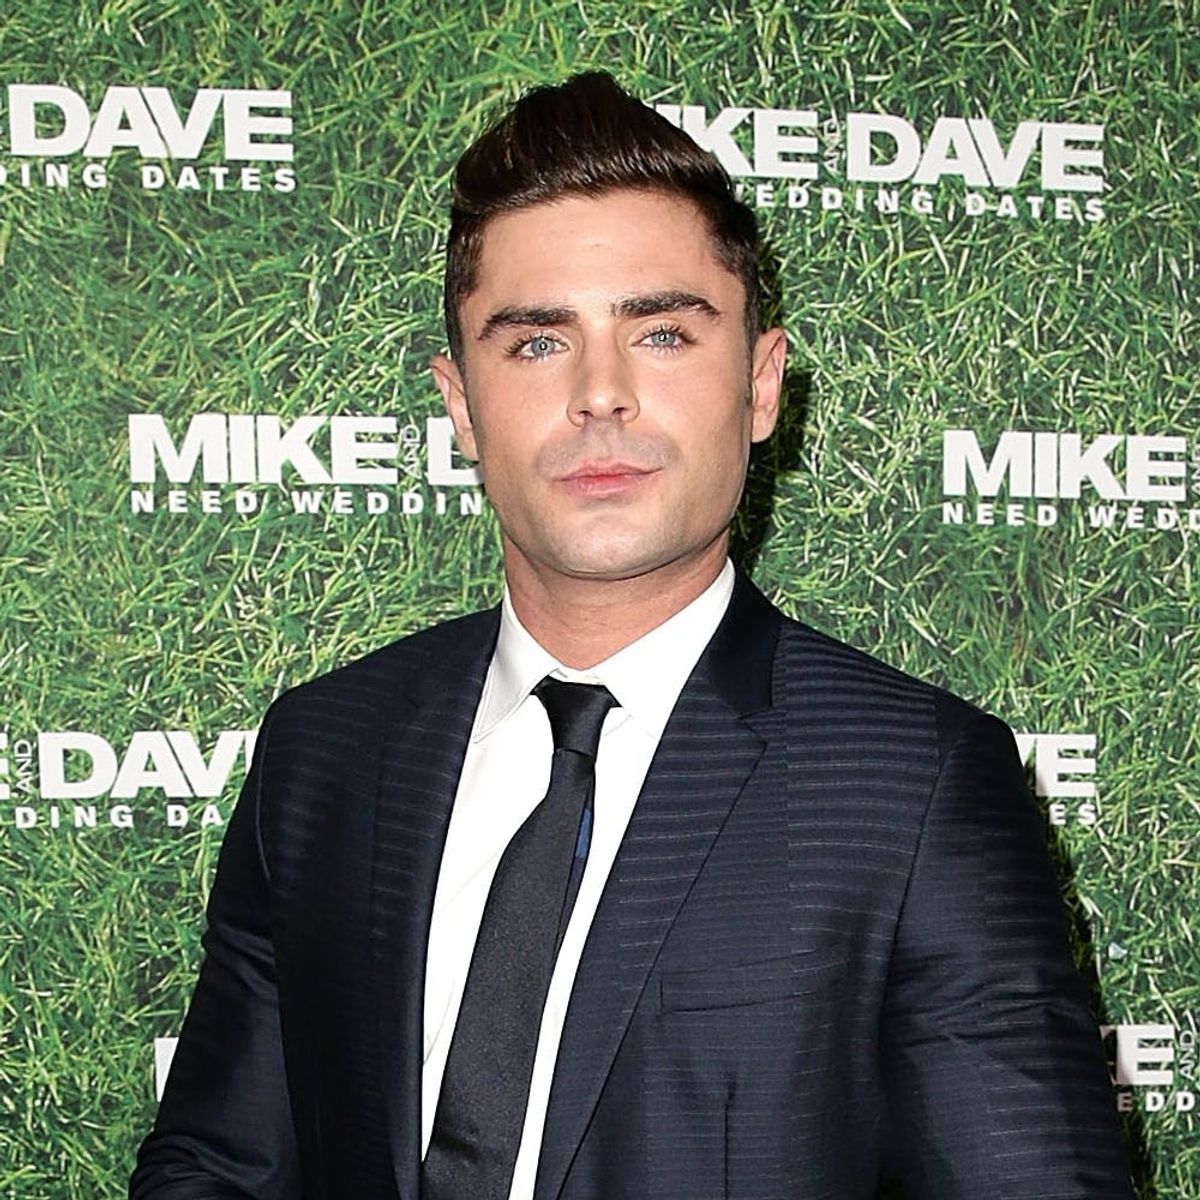 Zac Efron Just Made the Relationship Status Announcement You’ve Been Waiting For